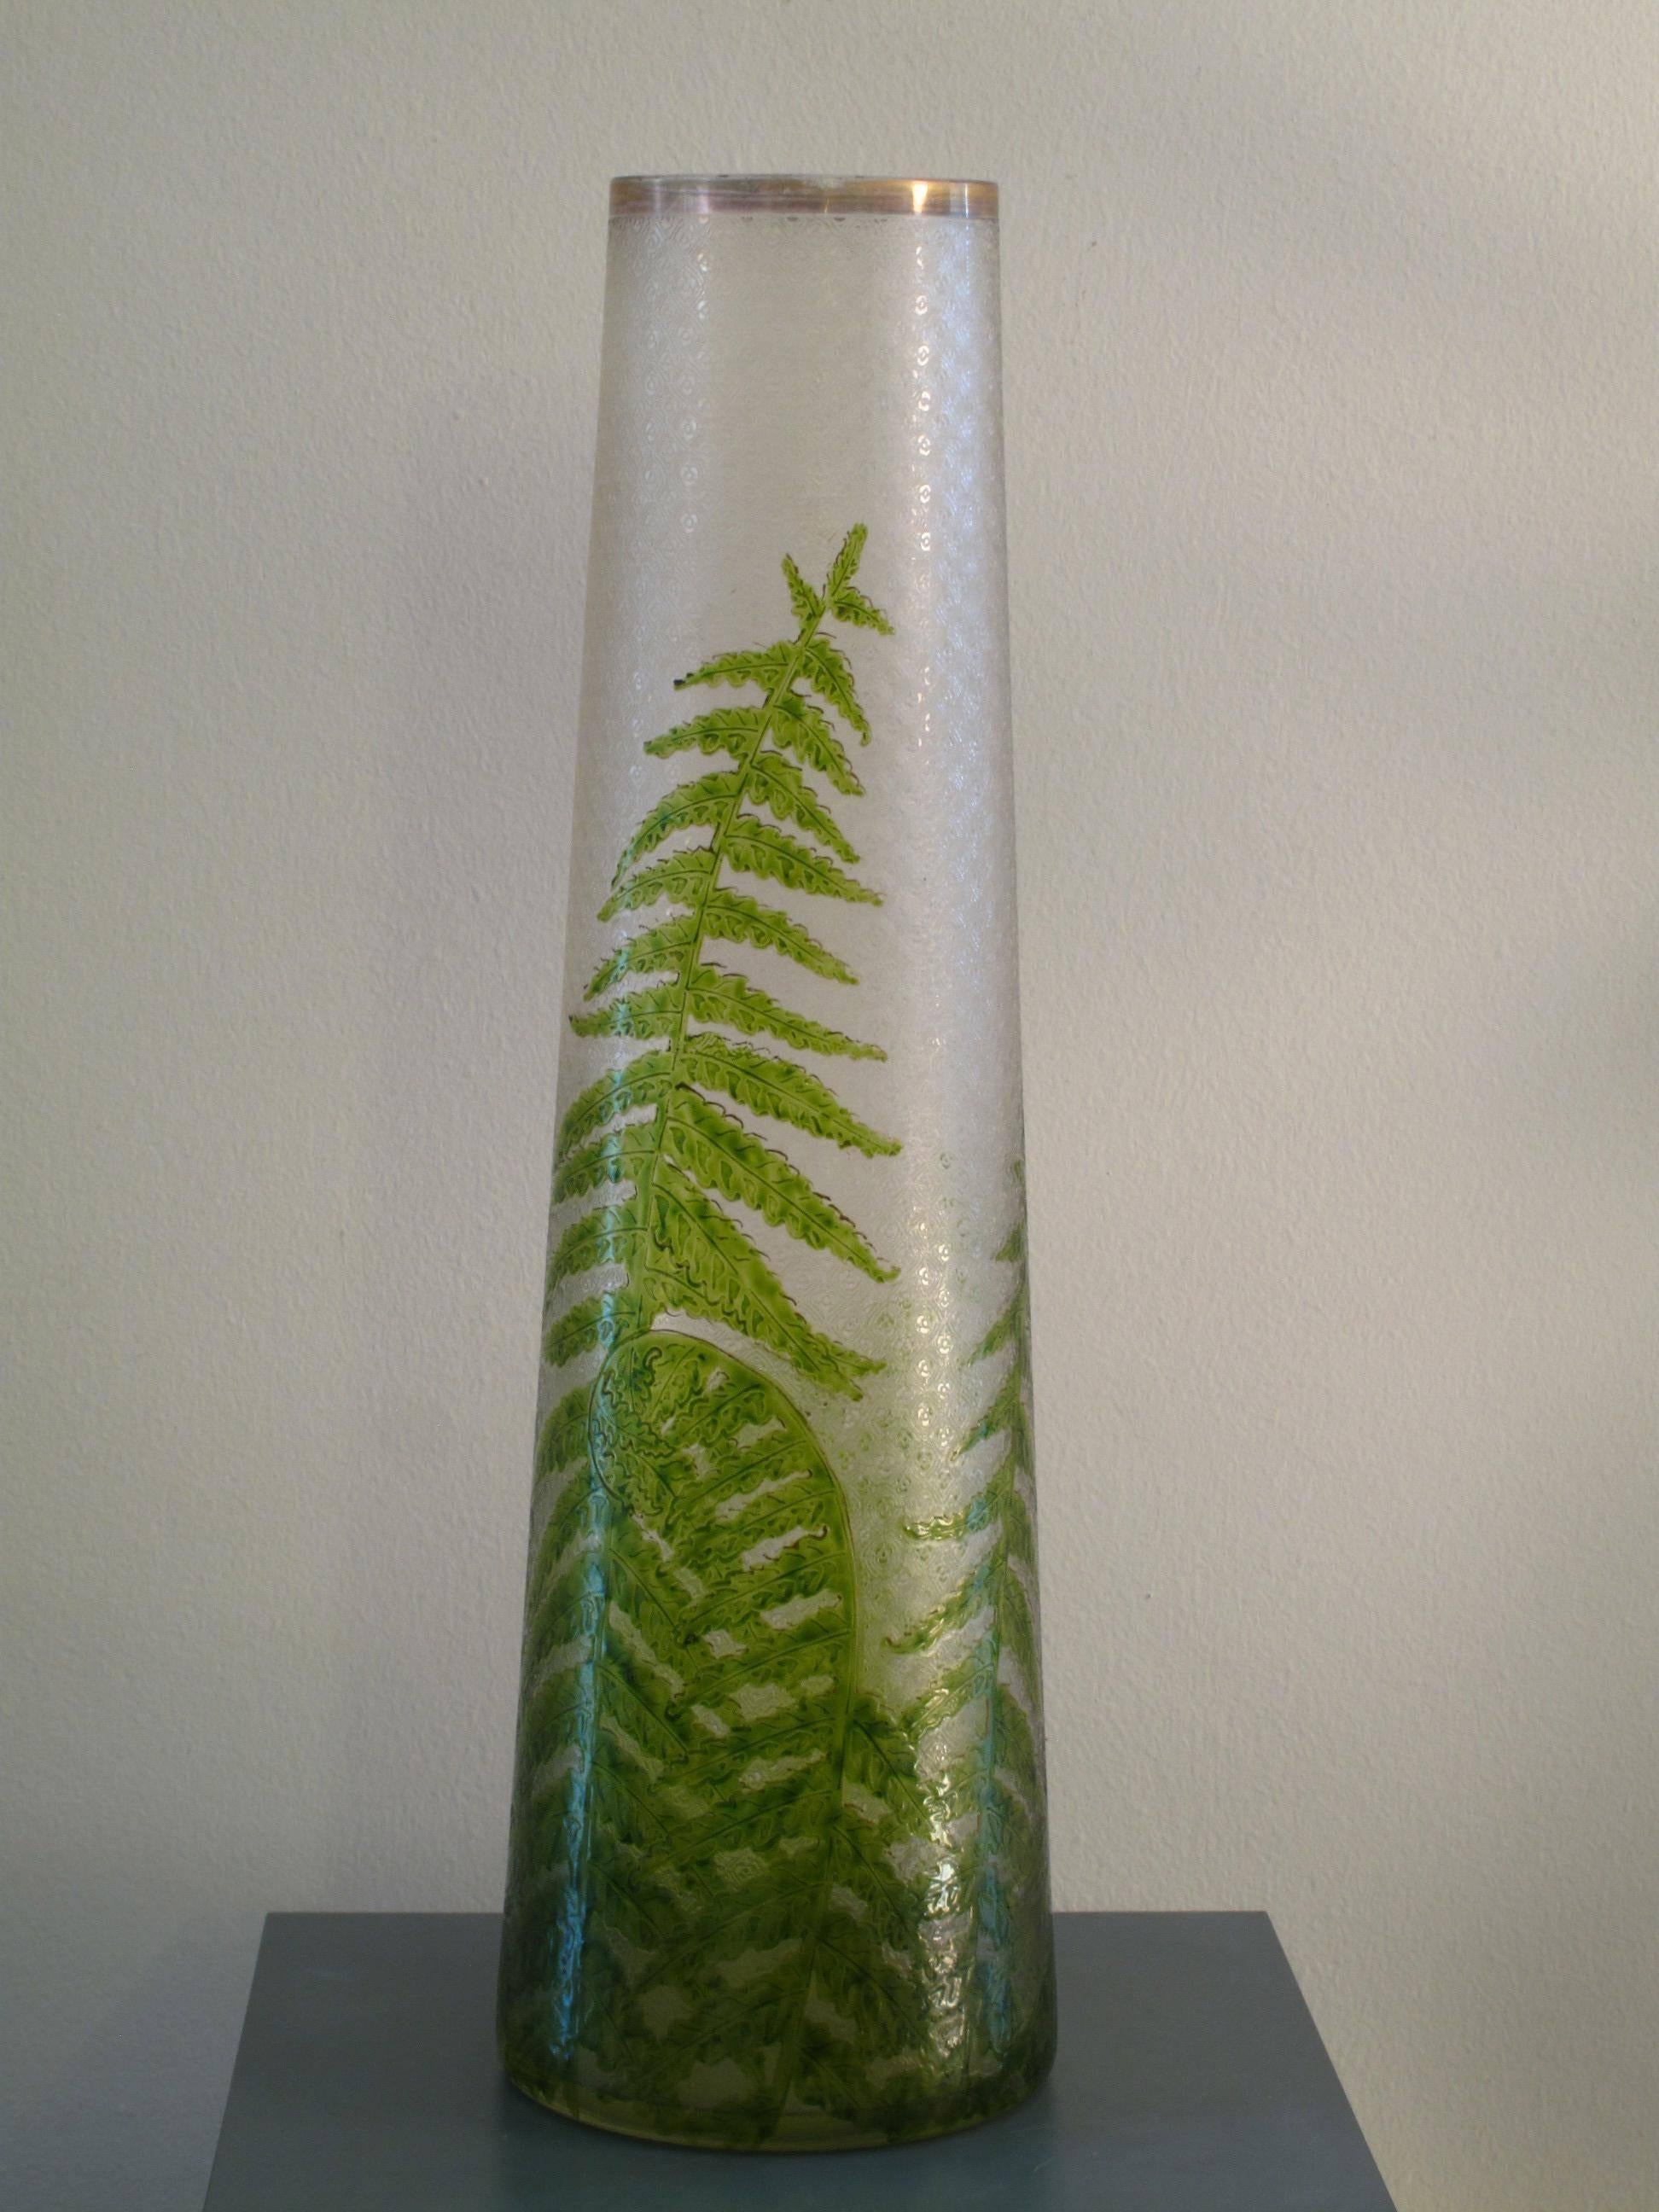 Tall French vase in textured art glass with metallic lip. Hand-painted with intricate fern design. Vase tapers from 6 in. diameter to 3 in. diameter at top.